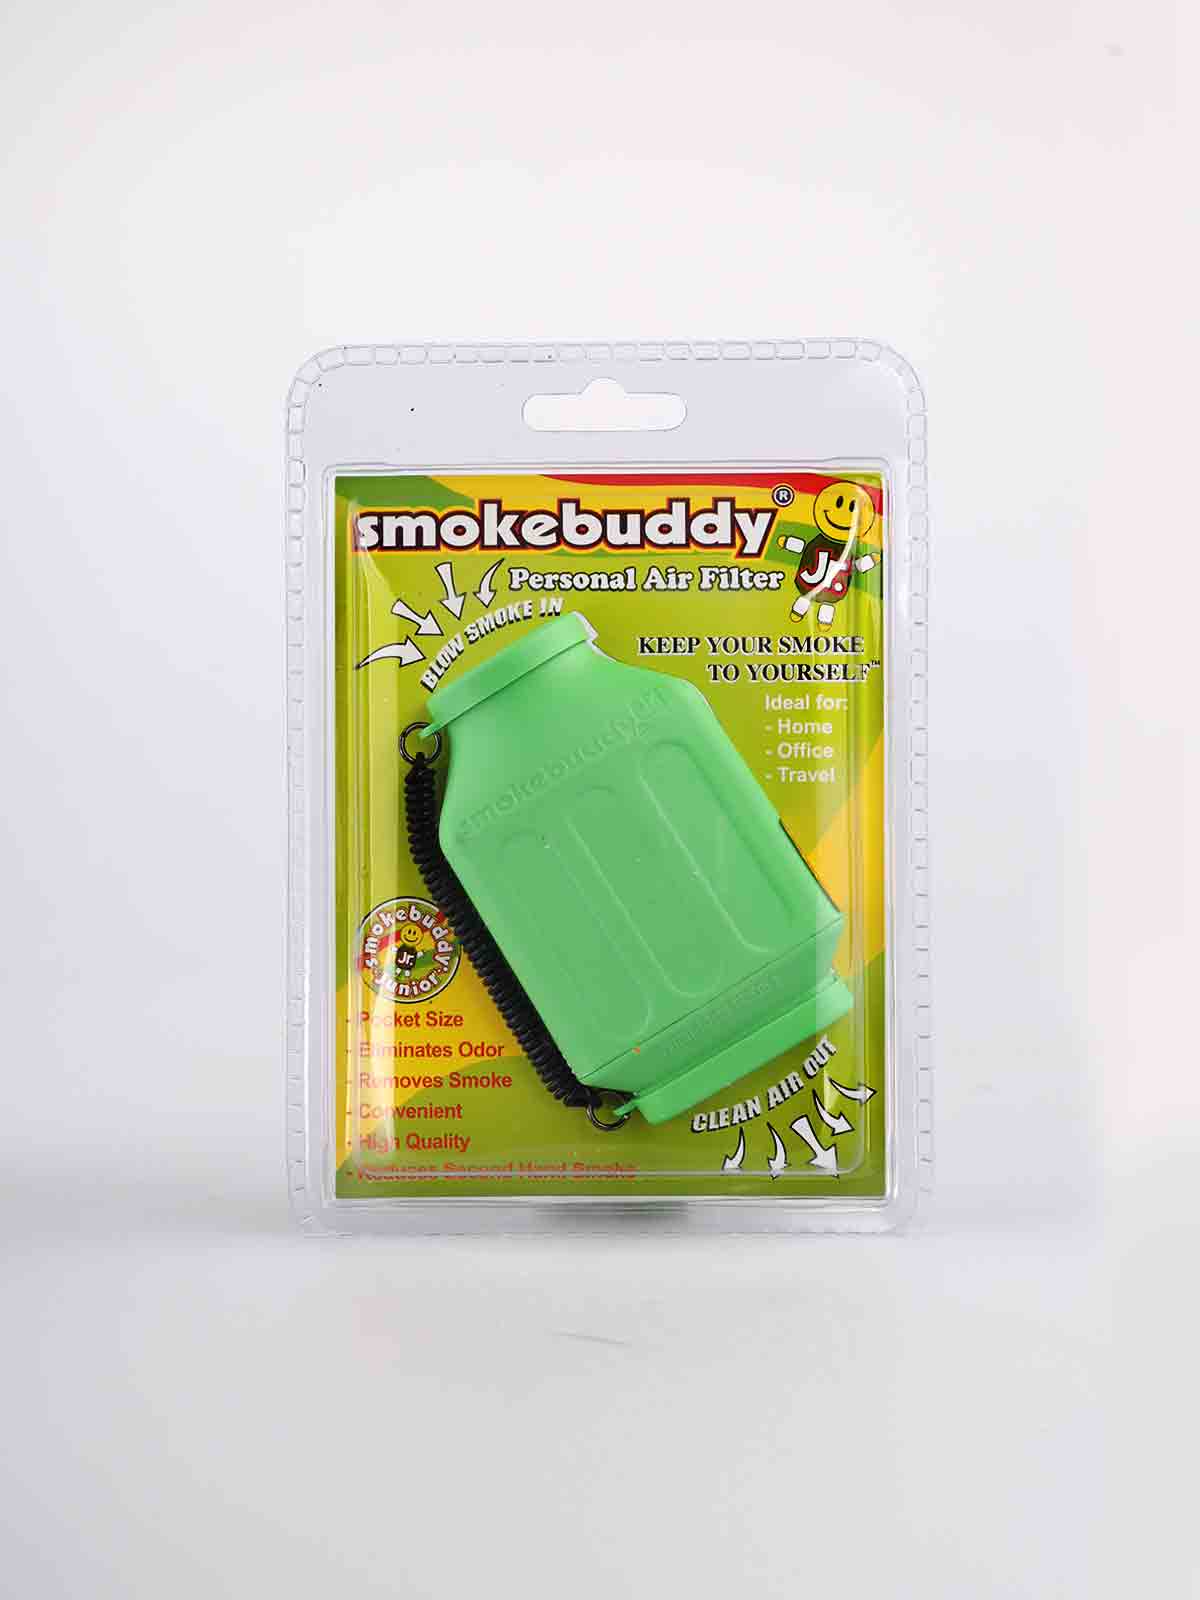 https://www.cosmicnz.co.nz/content/products/smokebuddy-jr-green-image-1-27196.jpg